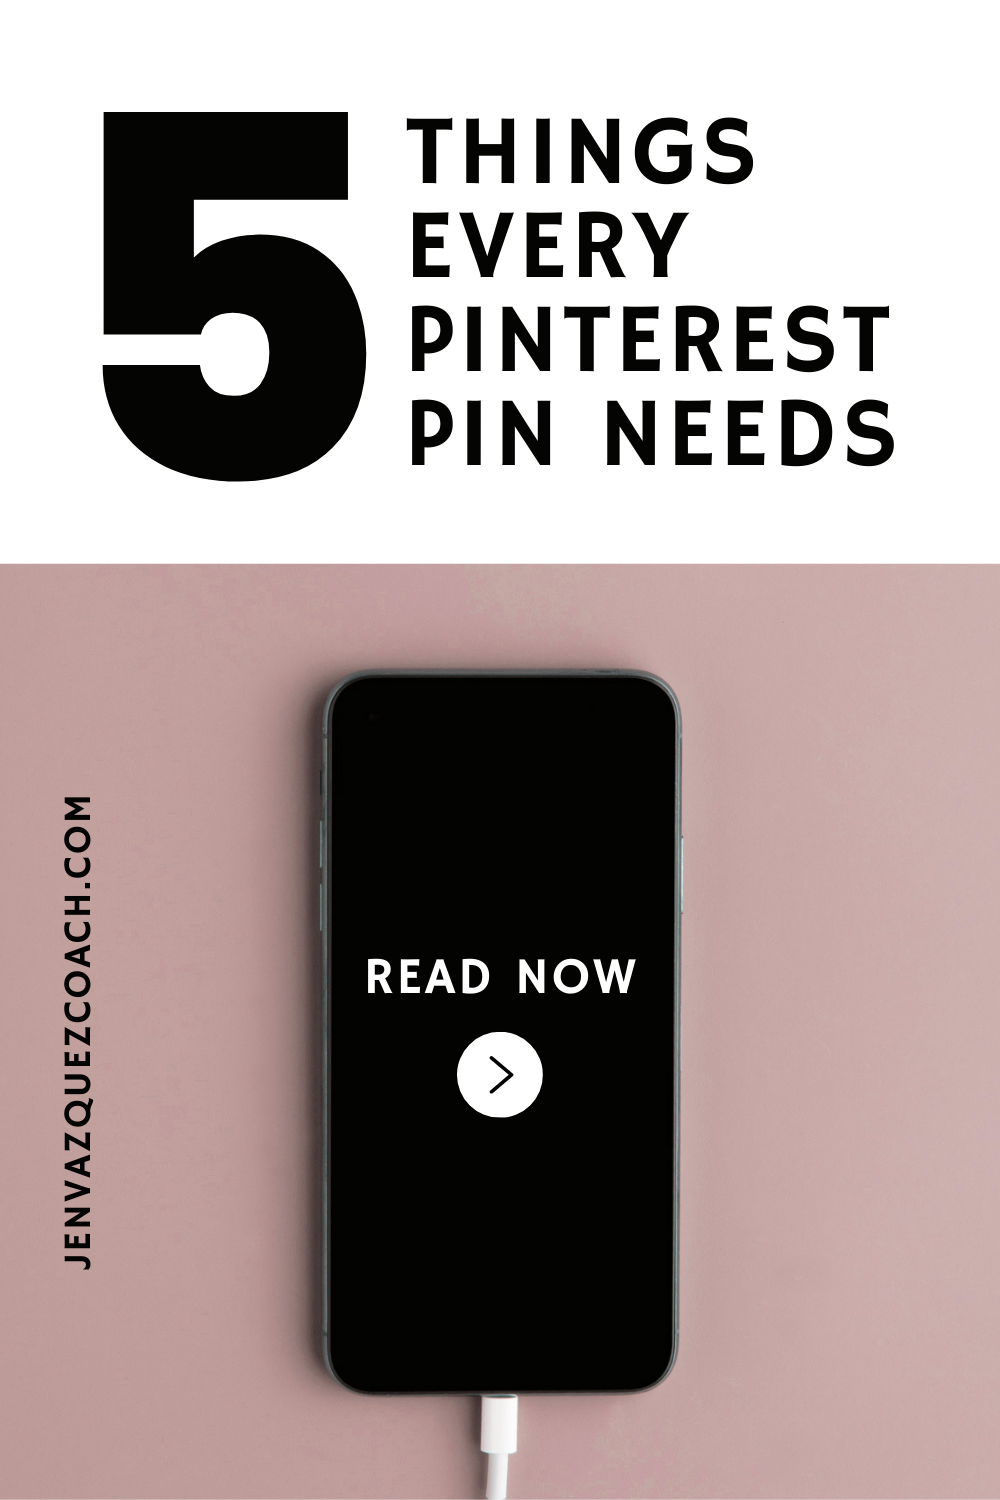 5 things every pinterest pin needs by Jen Vazquez Marketing and Pinterest Strategist